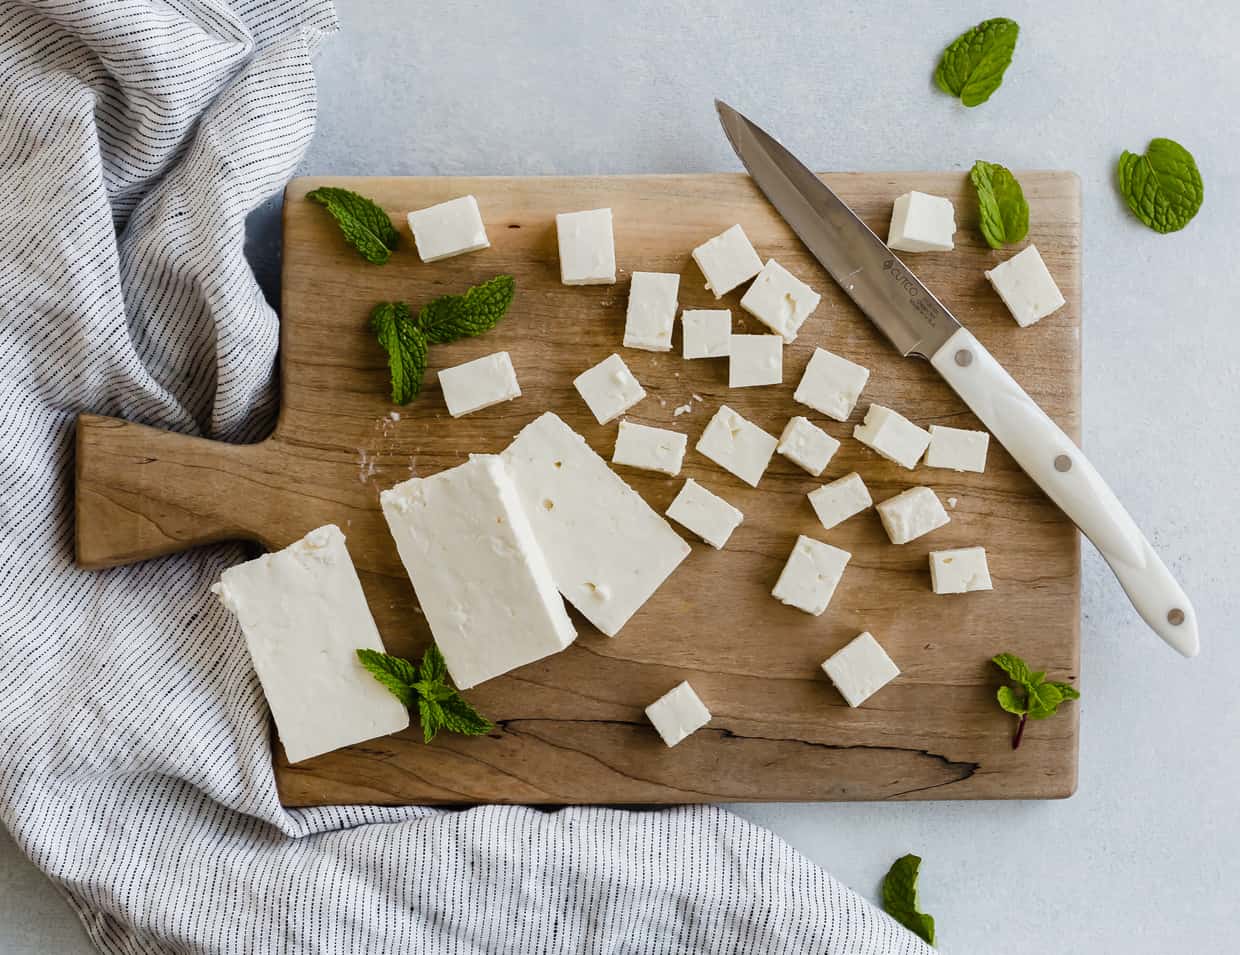 Overhead view of a wooden cutting board with a block of feta cheese cut into small squares.